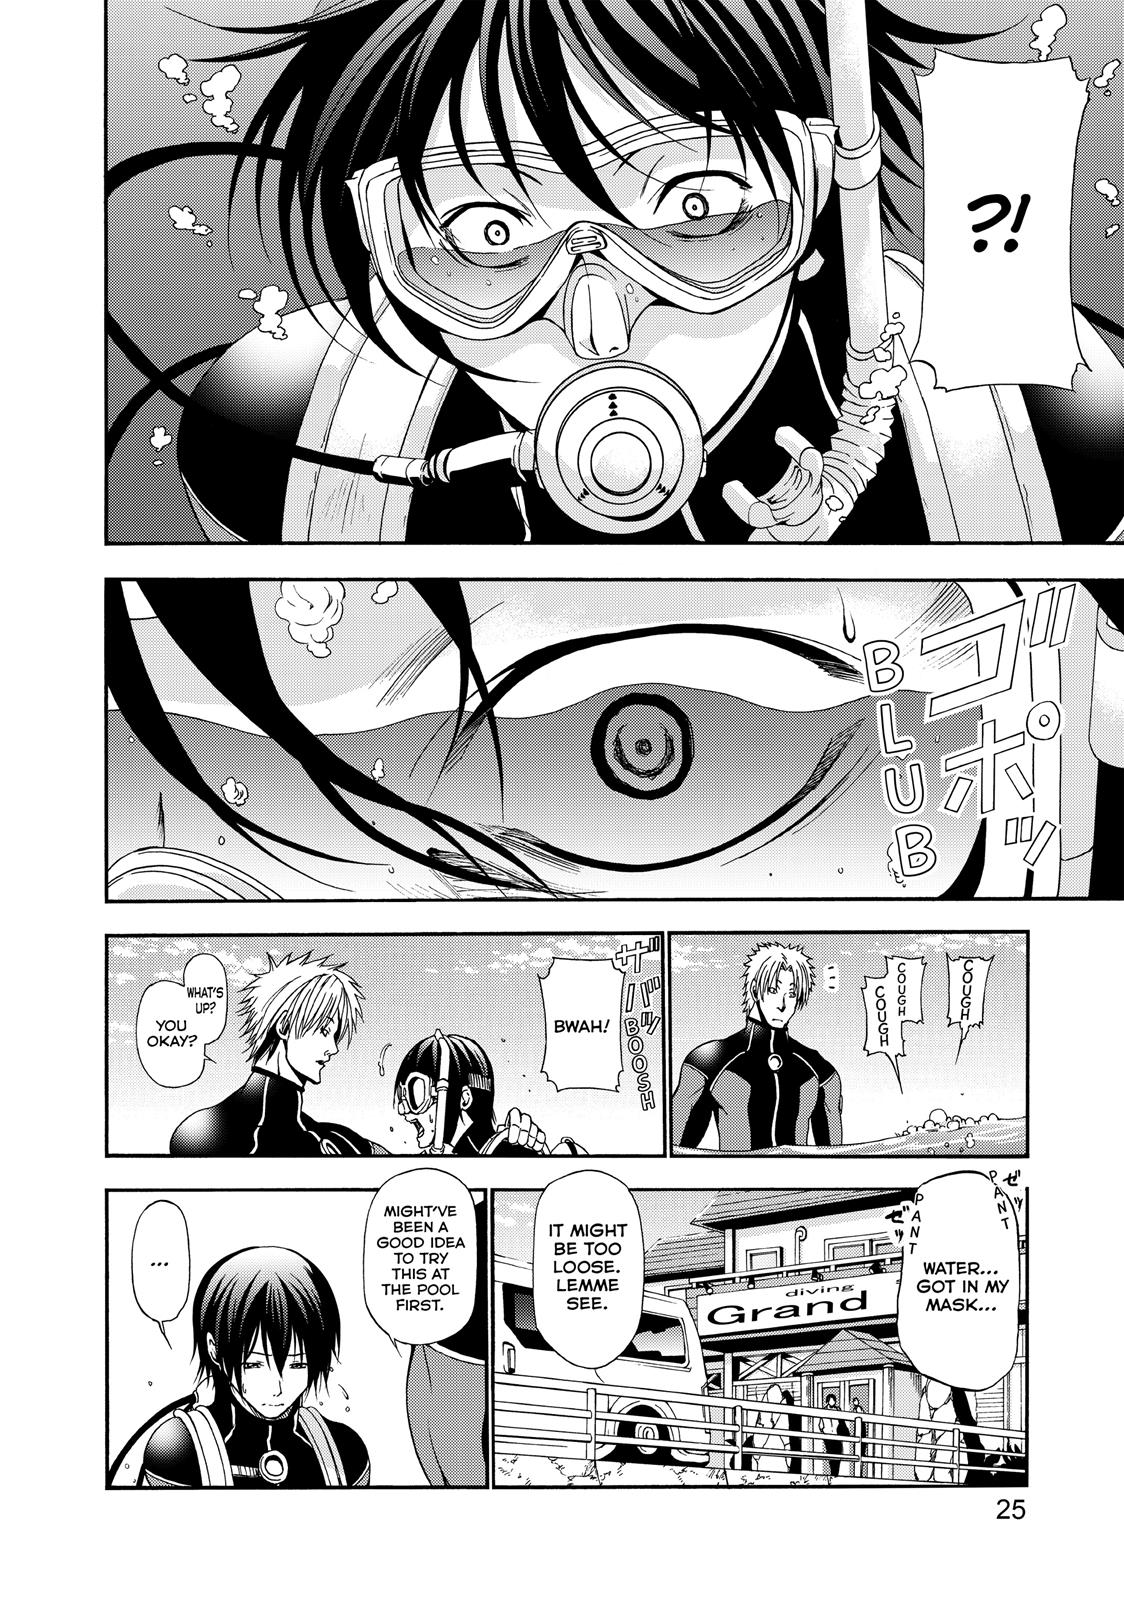 Grand Blue, Chapter 5 image 26